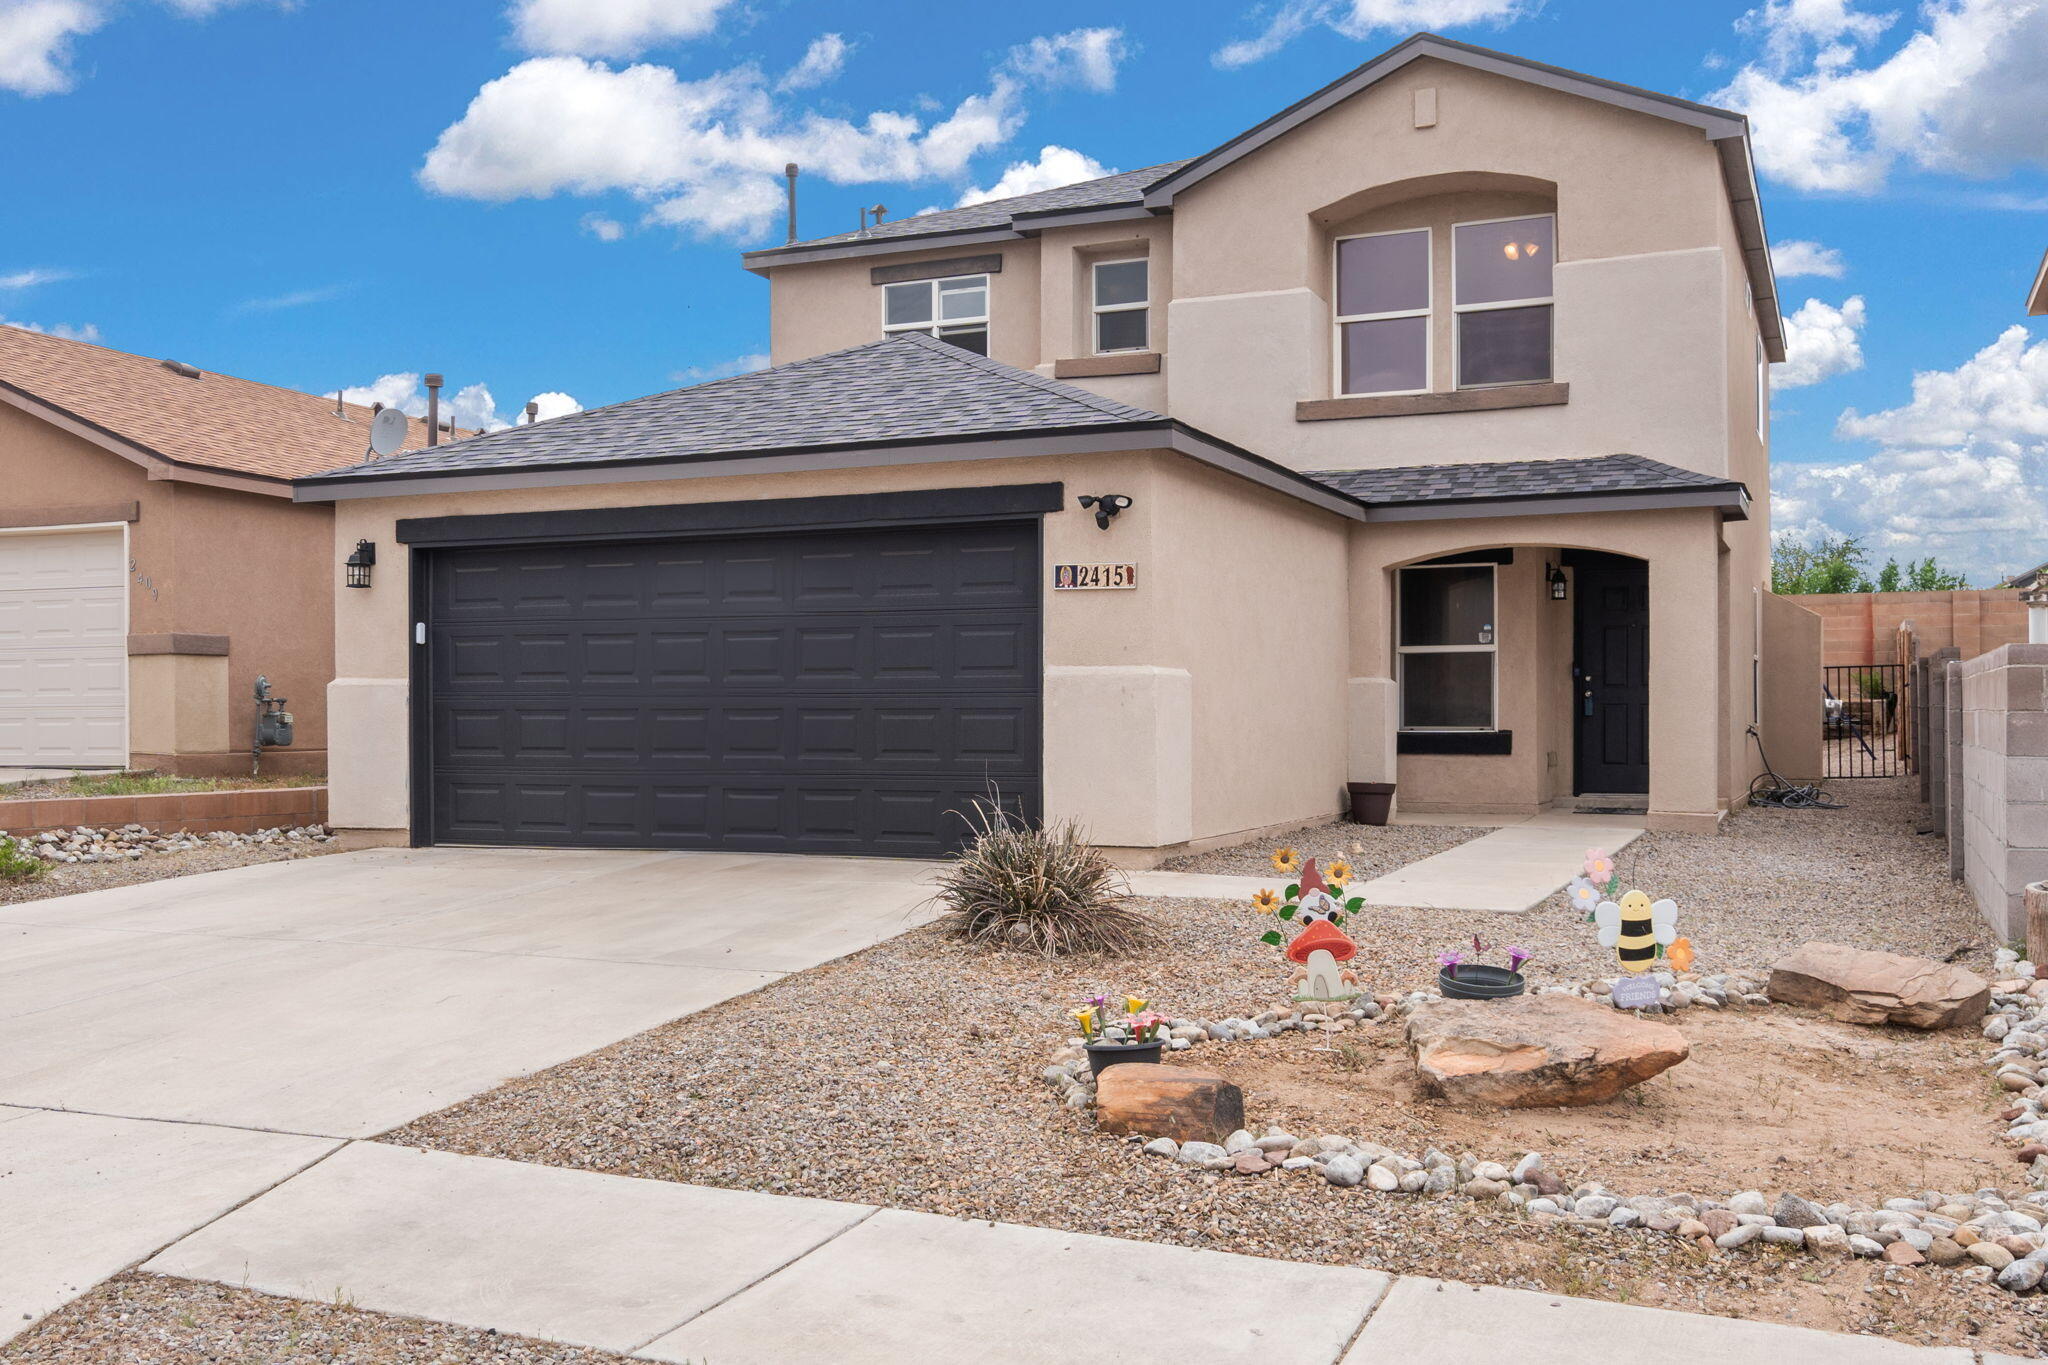 2415 Angel Drive NW, Albuquerque, New Mexico 87120, 3 Bedrooms Bedrooms, ,3 BathroomsBathrooms,Residential,For Sale,2415 Angel Drive NW,1061309